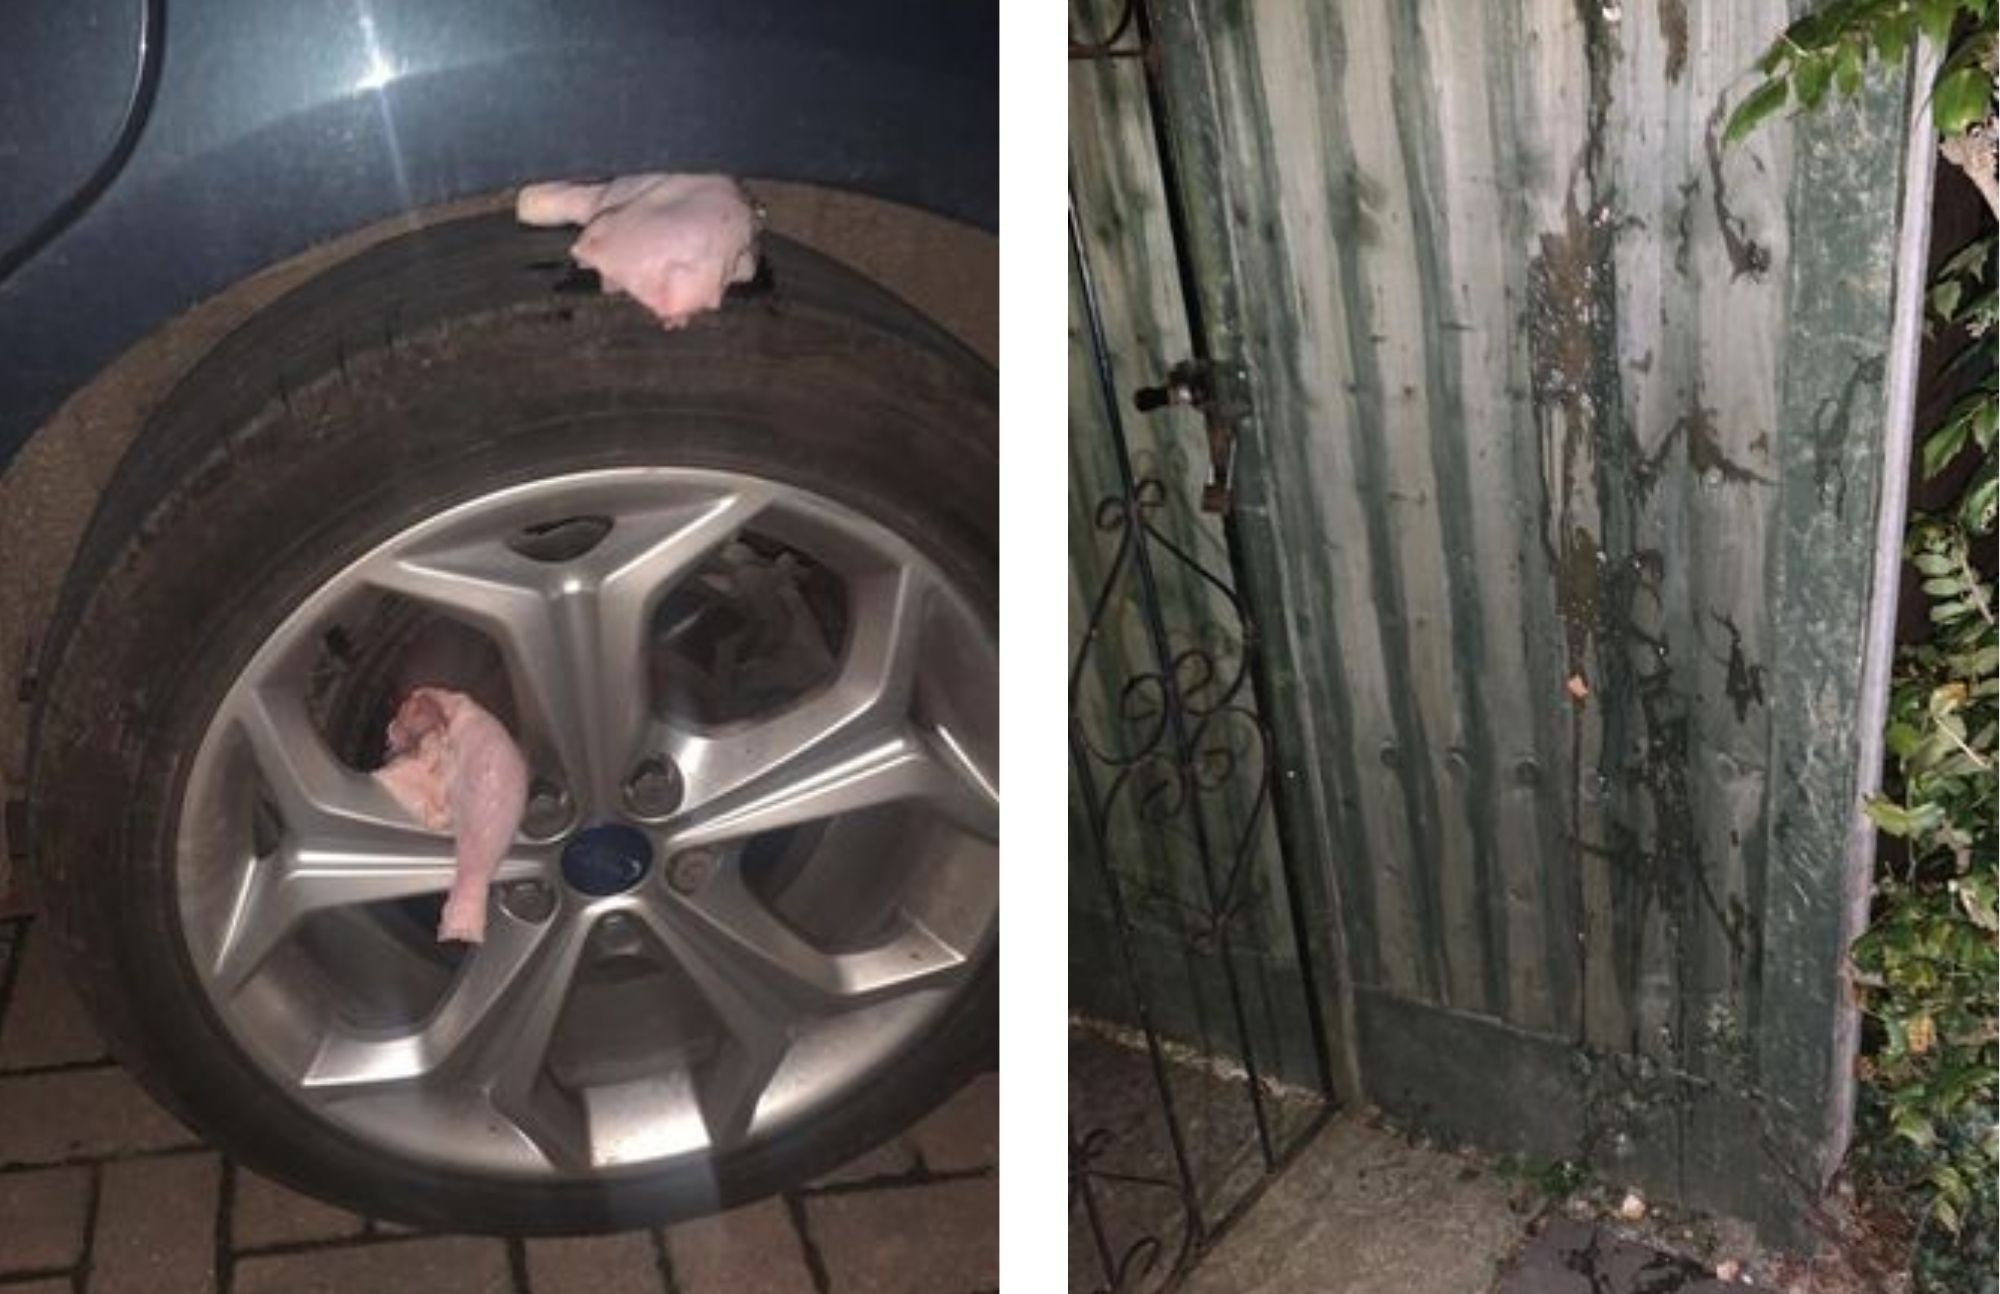 On the left picture is an uncooked chicken legs in a wheel rim of a car and on the right is a stains of egg white on a fence